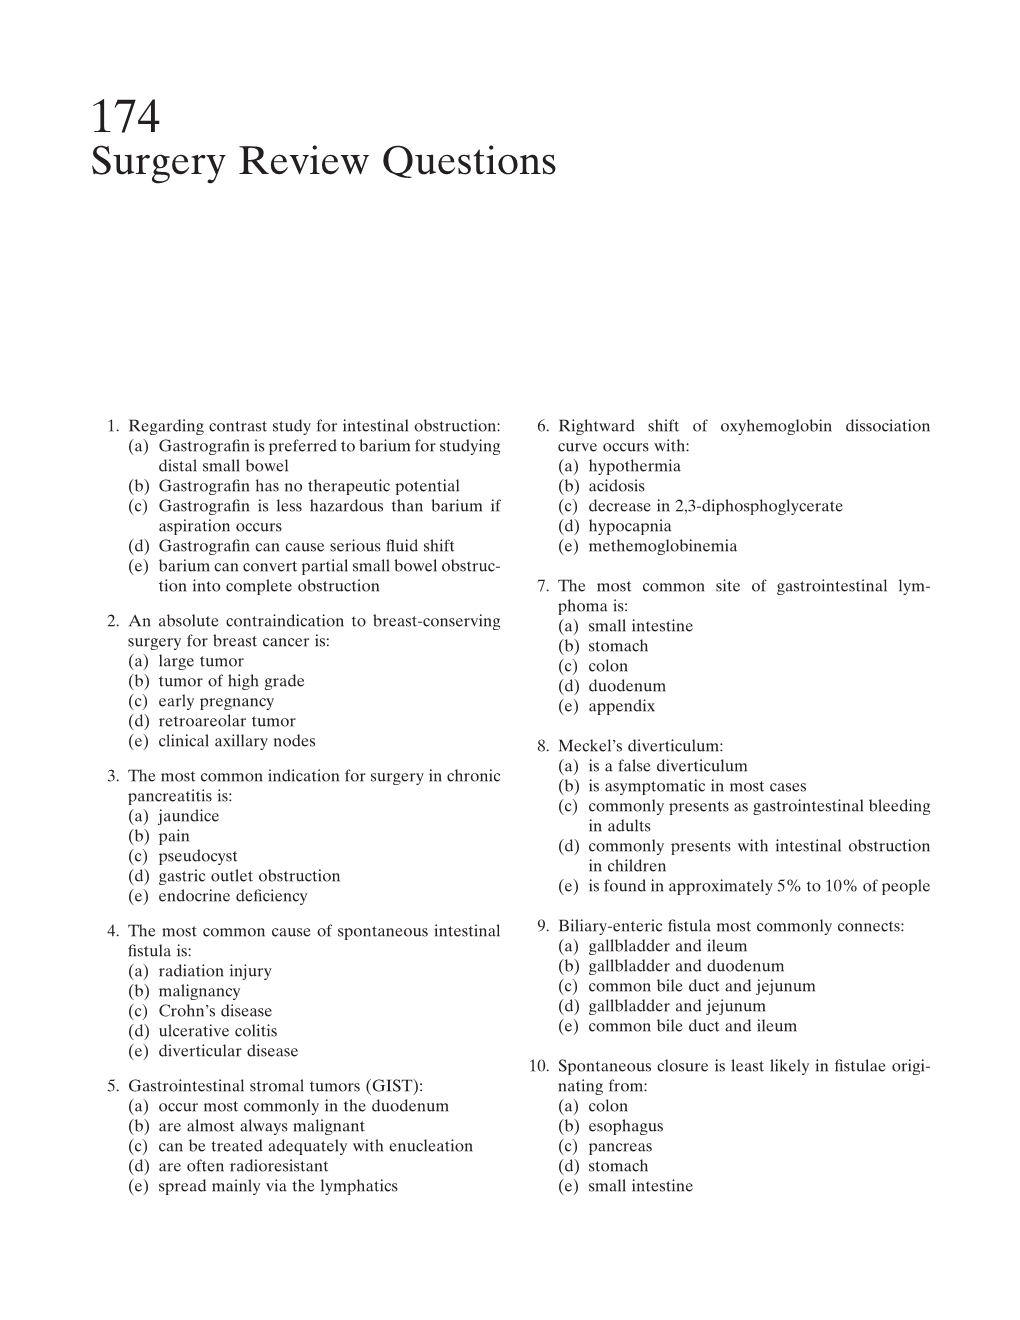 Surgery Review Questions